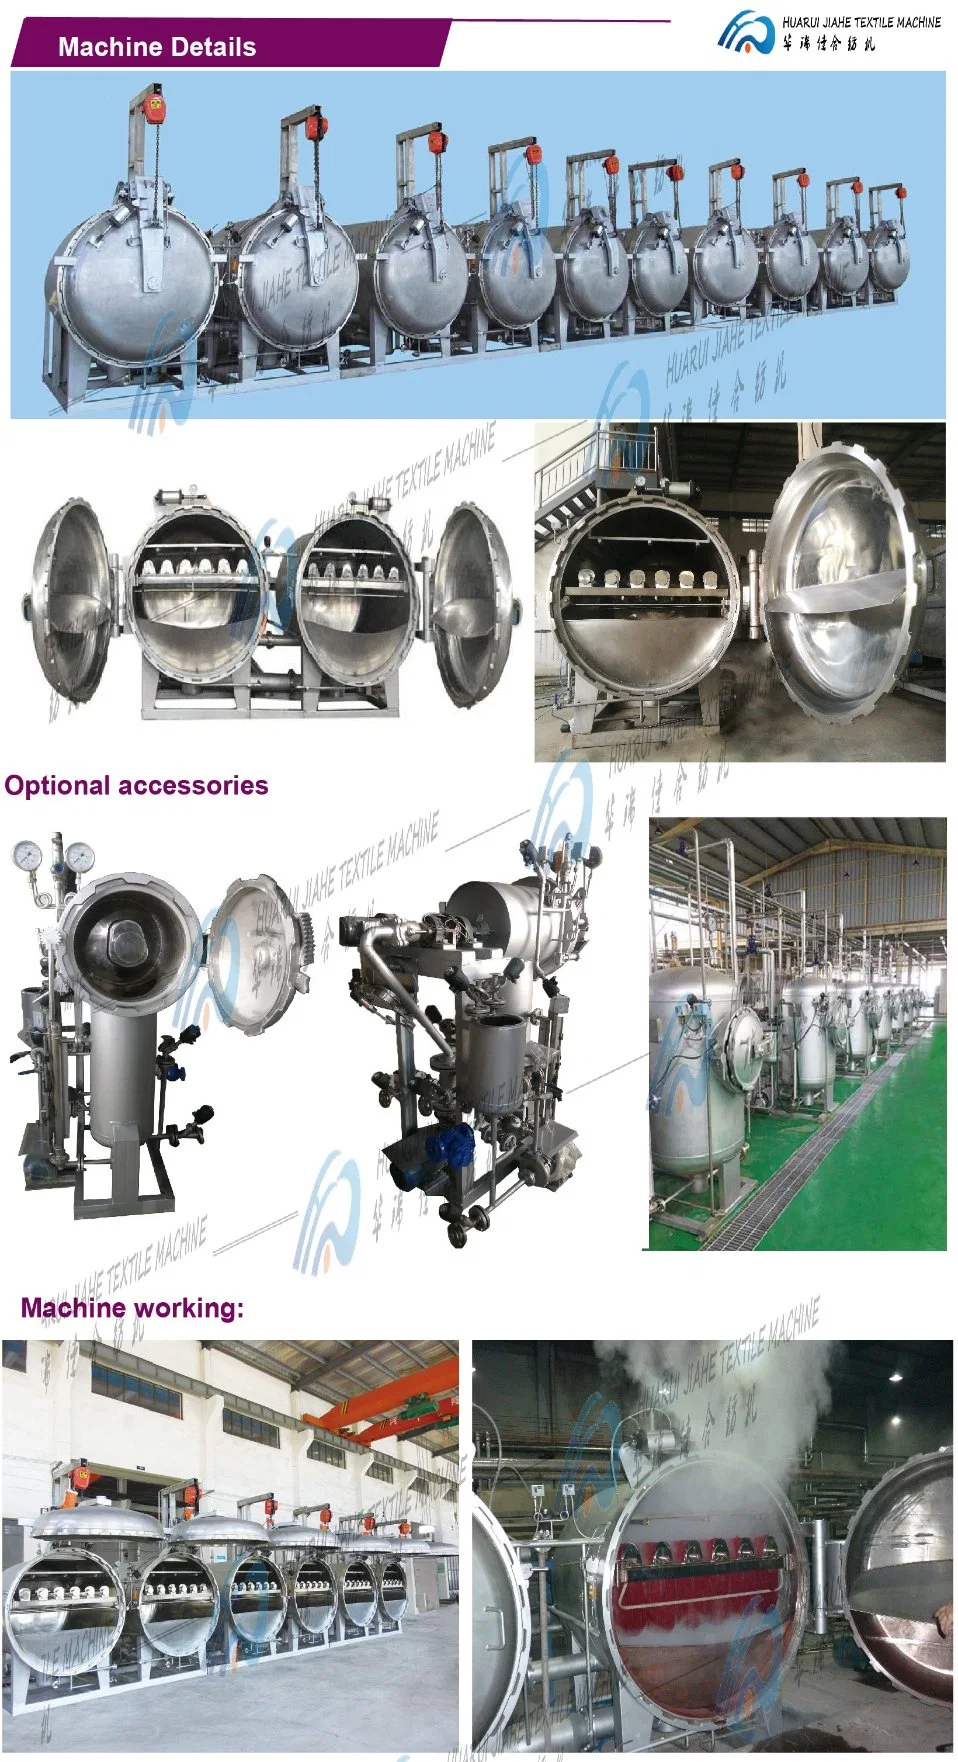 Energy Saving Dots Acronym First Aid Hydrocarbon Ultrasonic Cleaning Kuster Cold Batch Dyeing Machine Hank Yarn Overflow Dyeing Machine